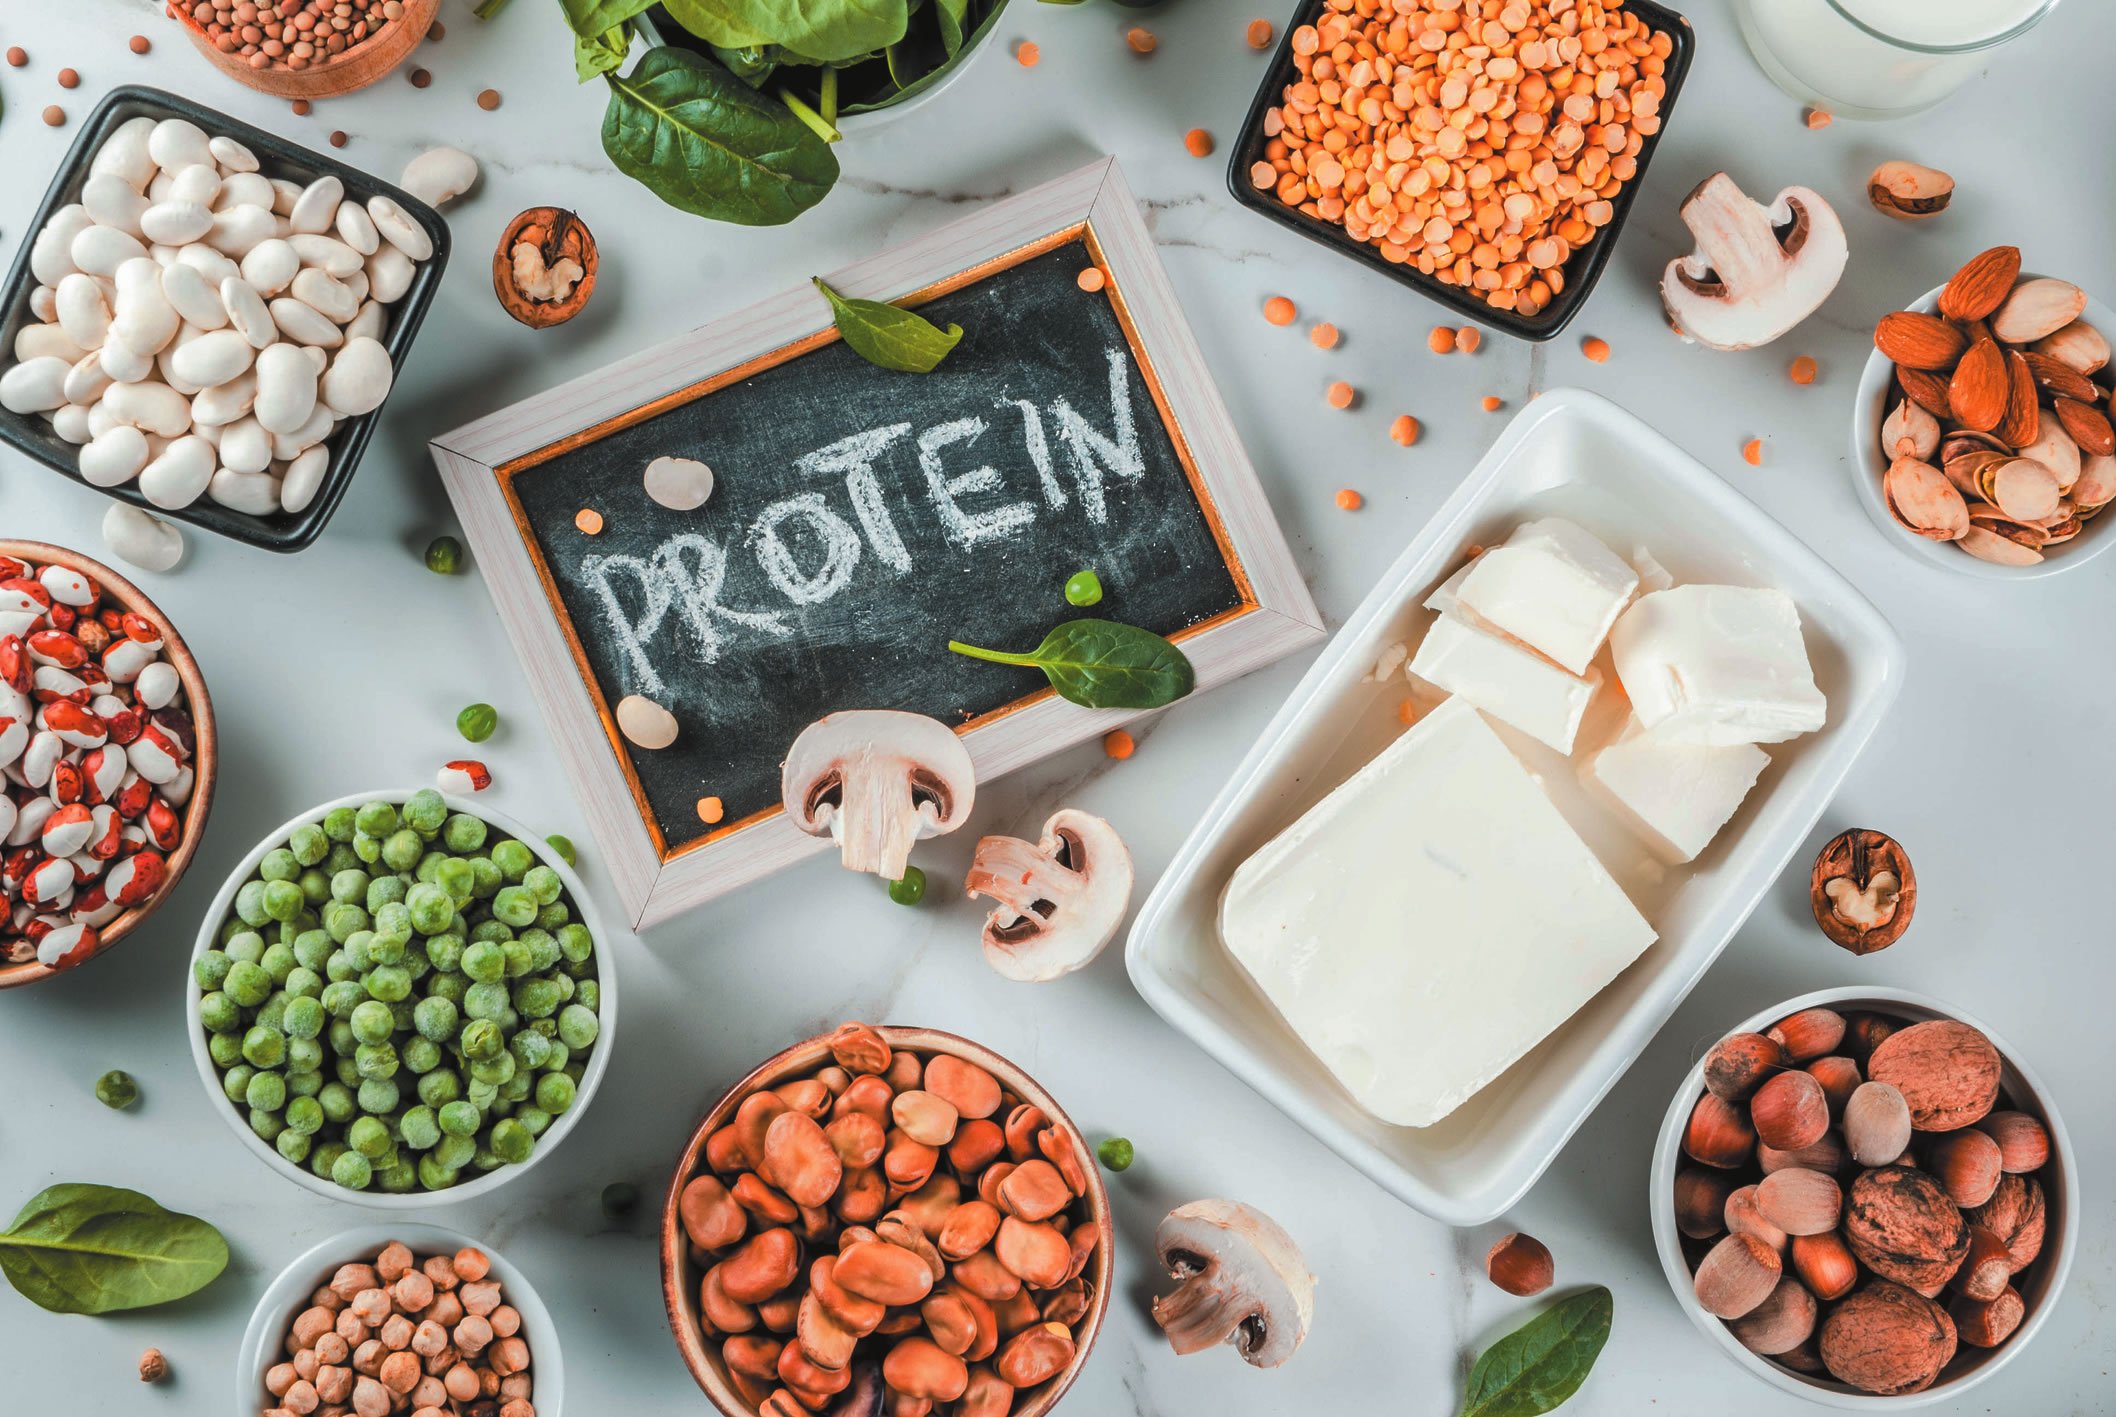 Nutrition for Life (2022)
Proteins